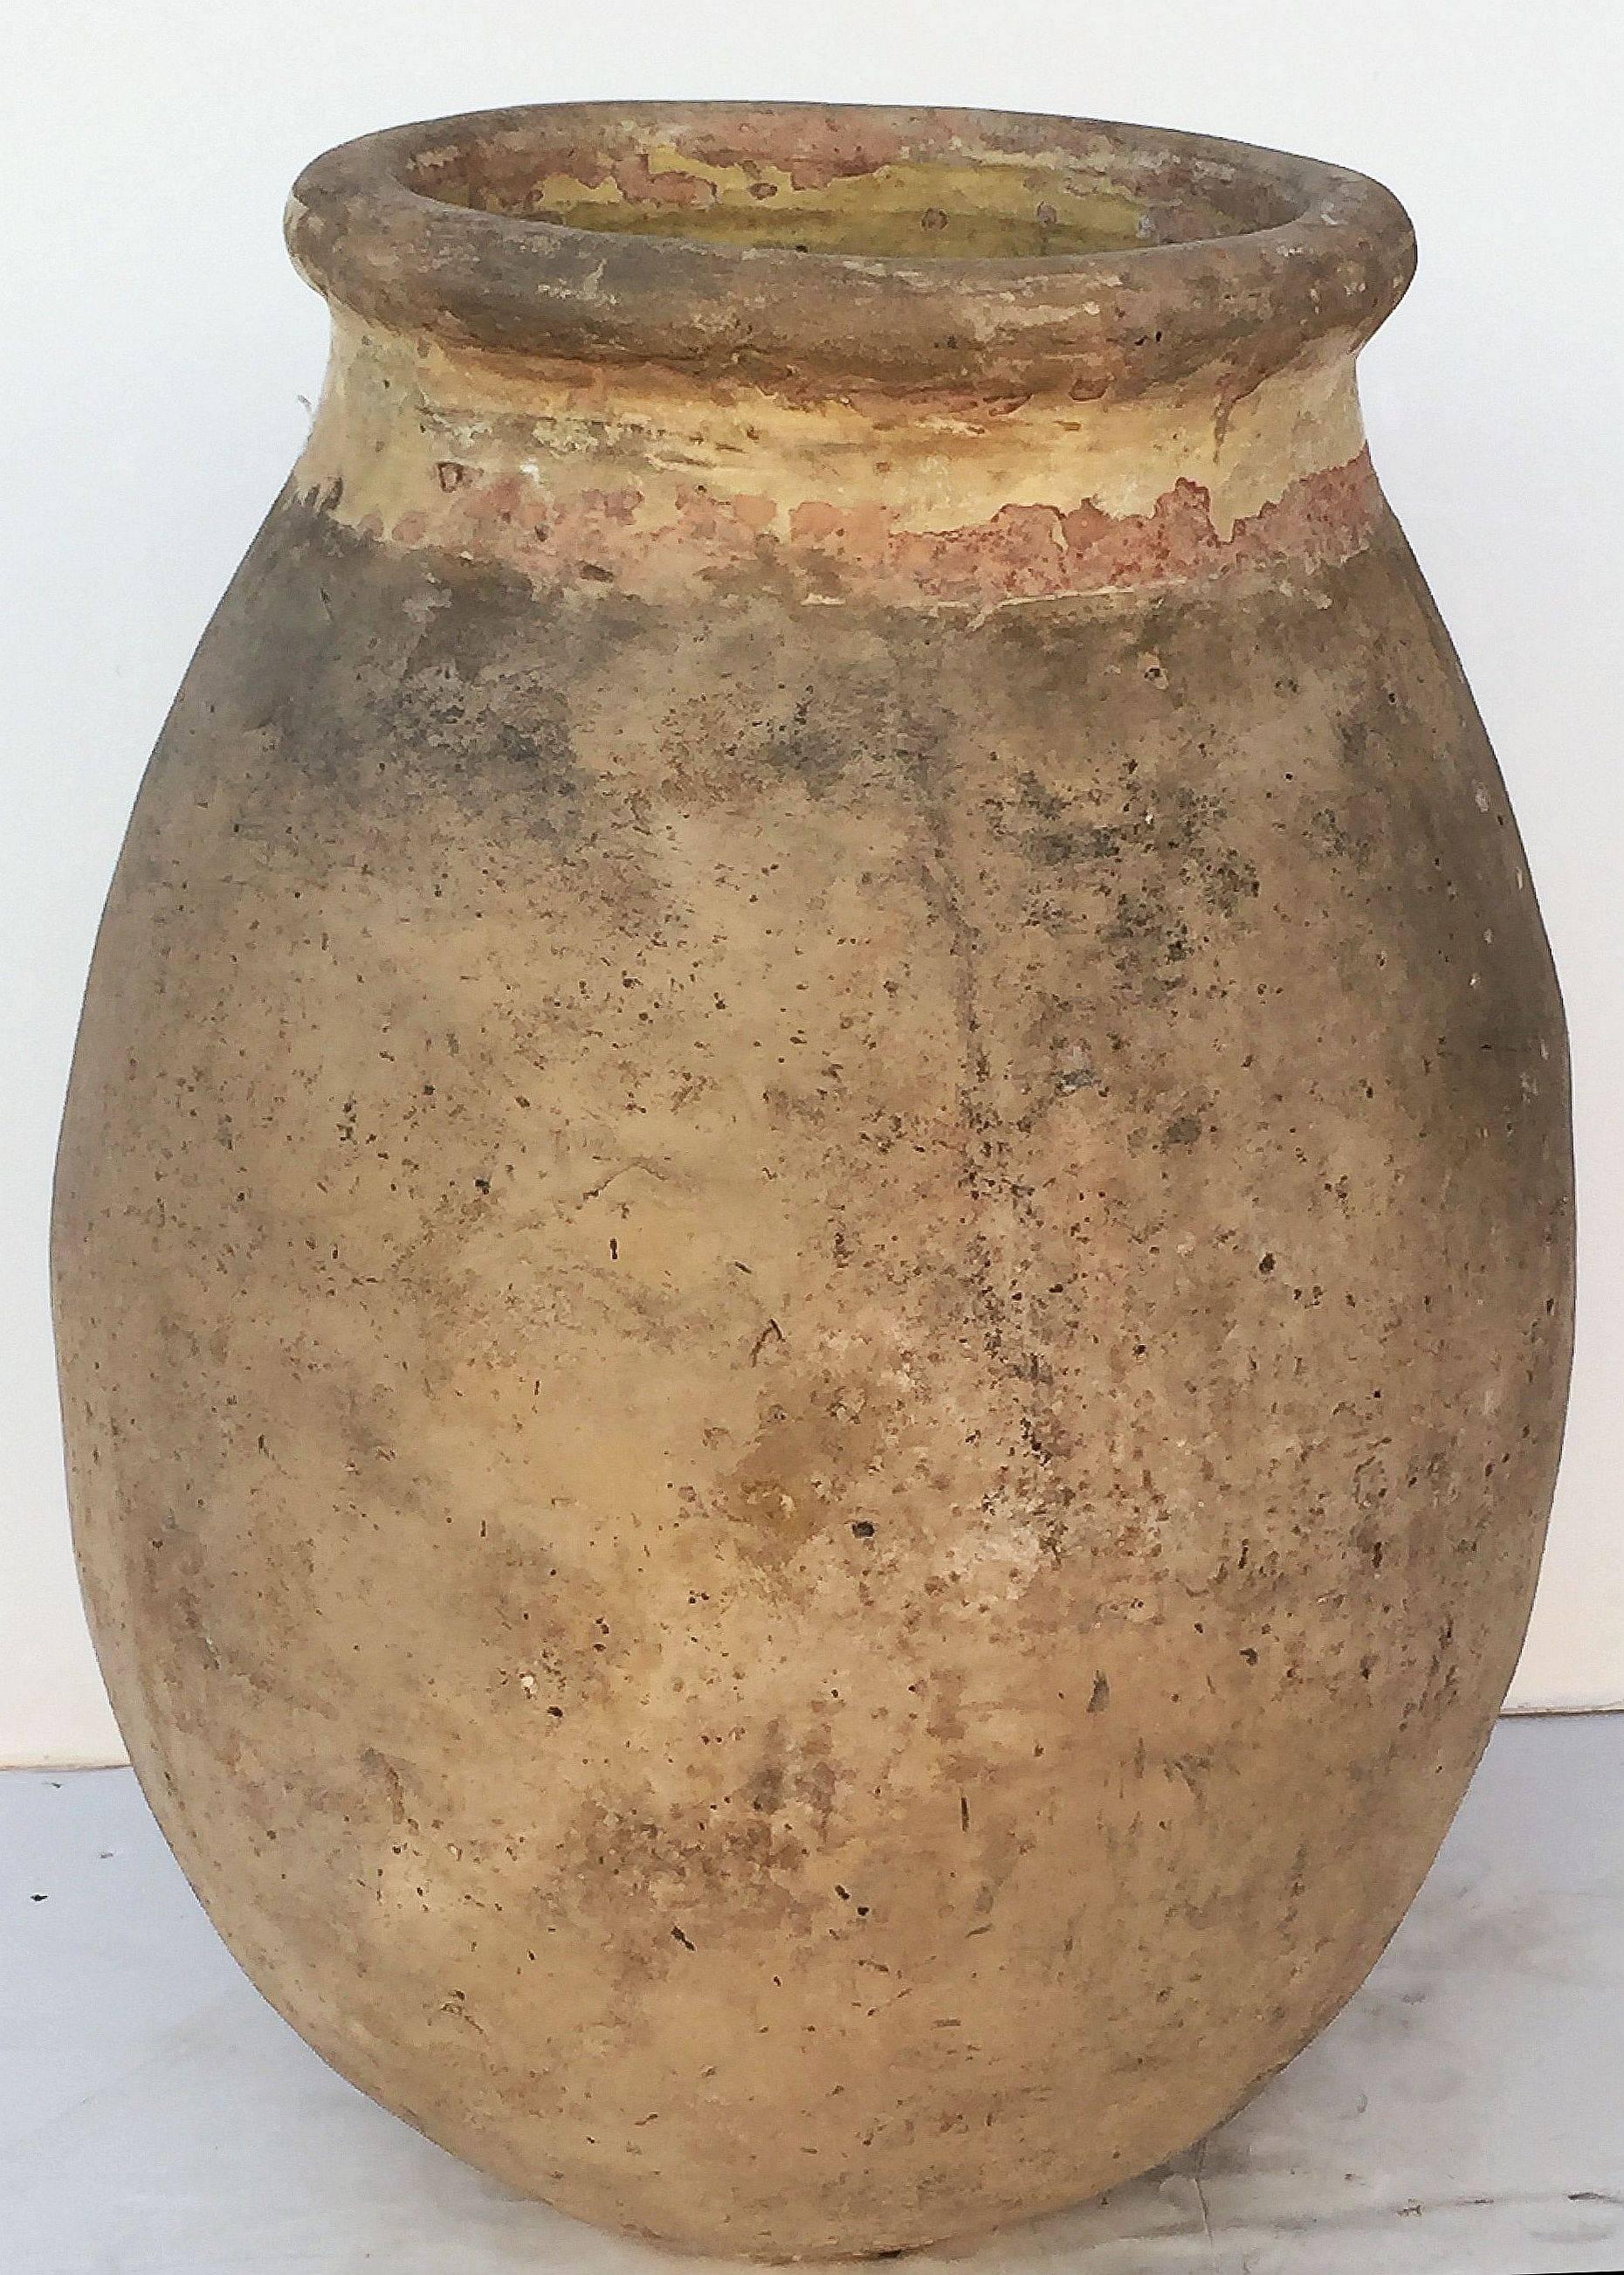 A handsome French garden pot or oil jar from the Biot, Alpes-Maritimes, region known as a pottery centre from the 18th century onward.

Featuring a glazed rolled-edge top over a smooth, cylindrical body and functional as a garden ornament, fountain,